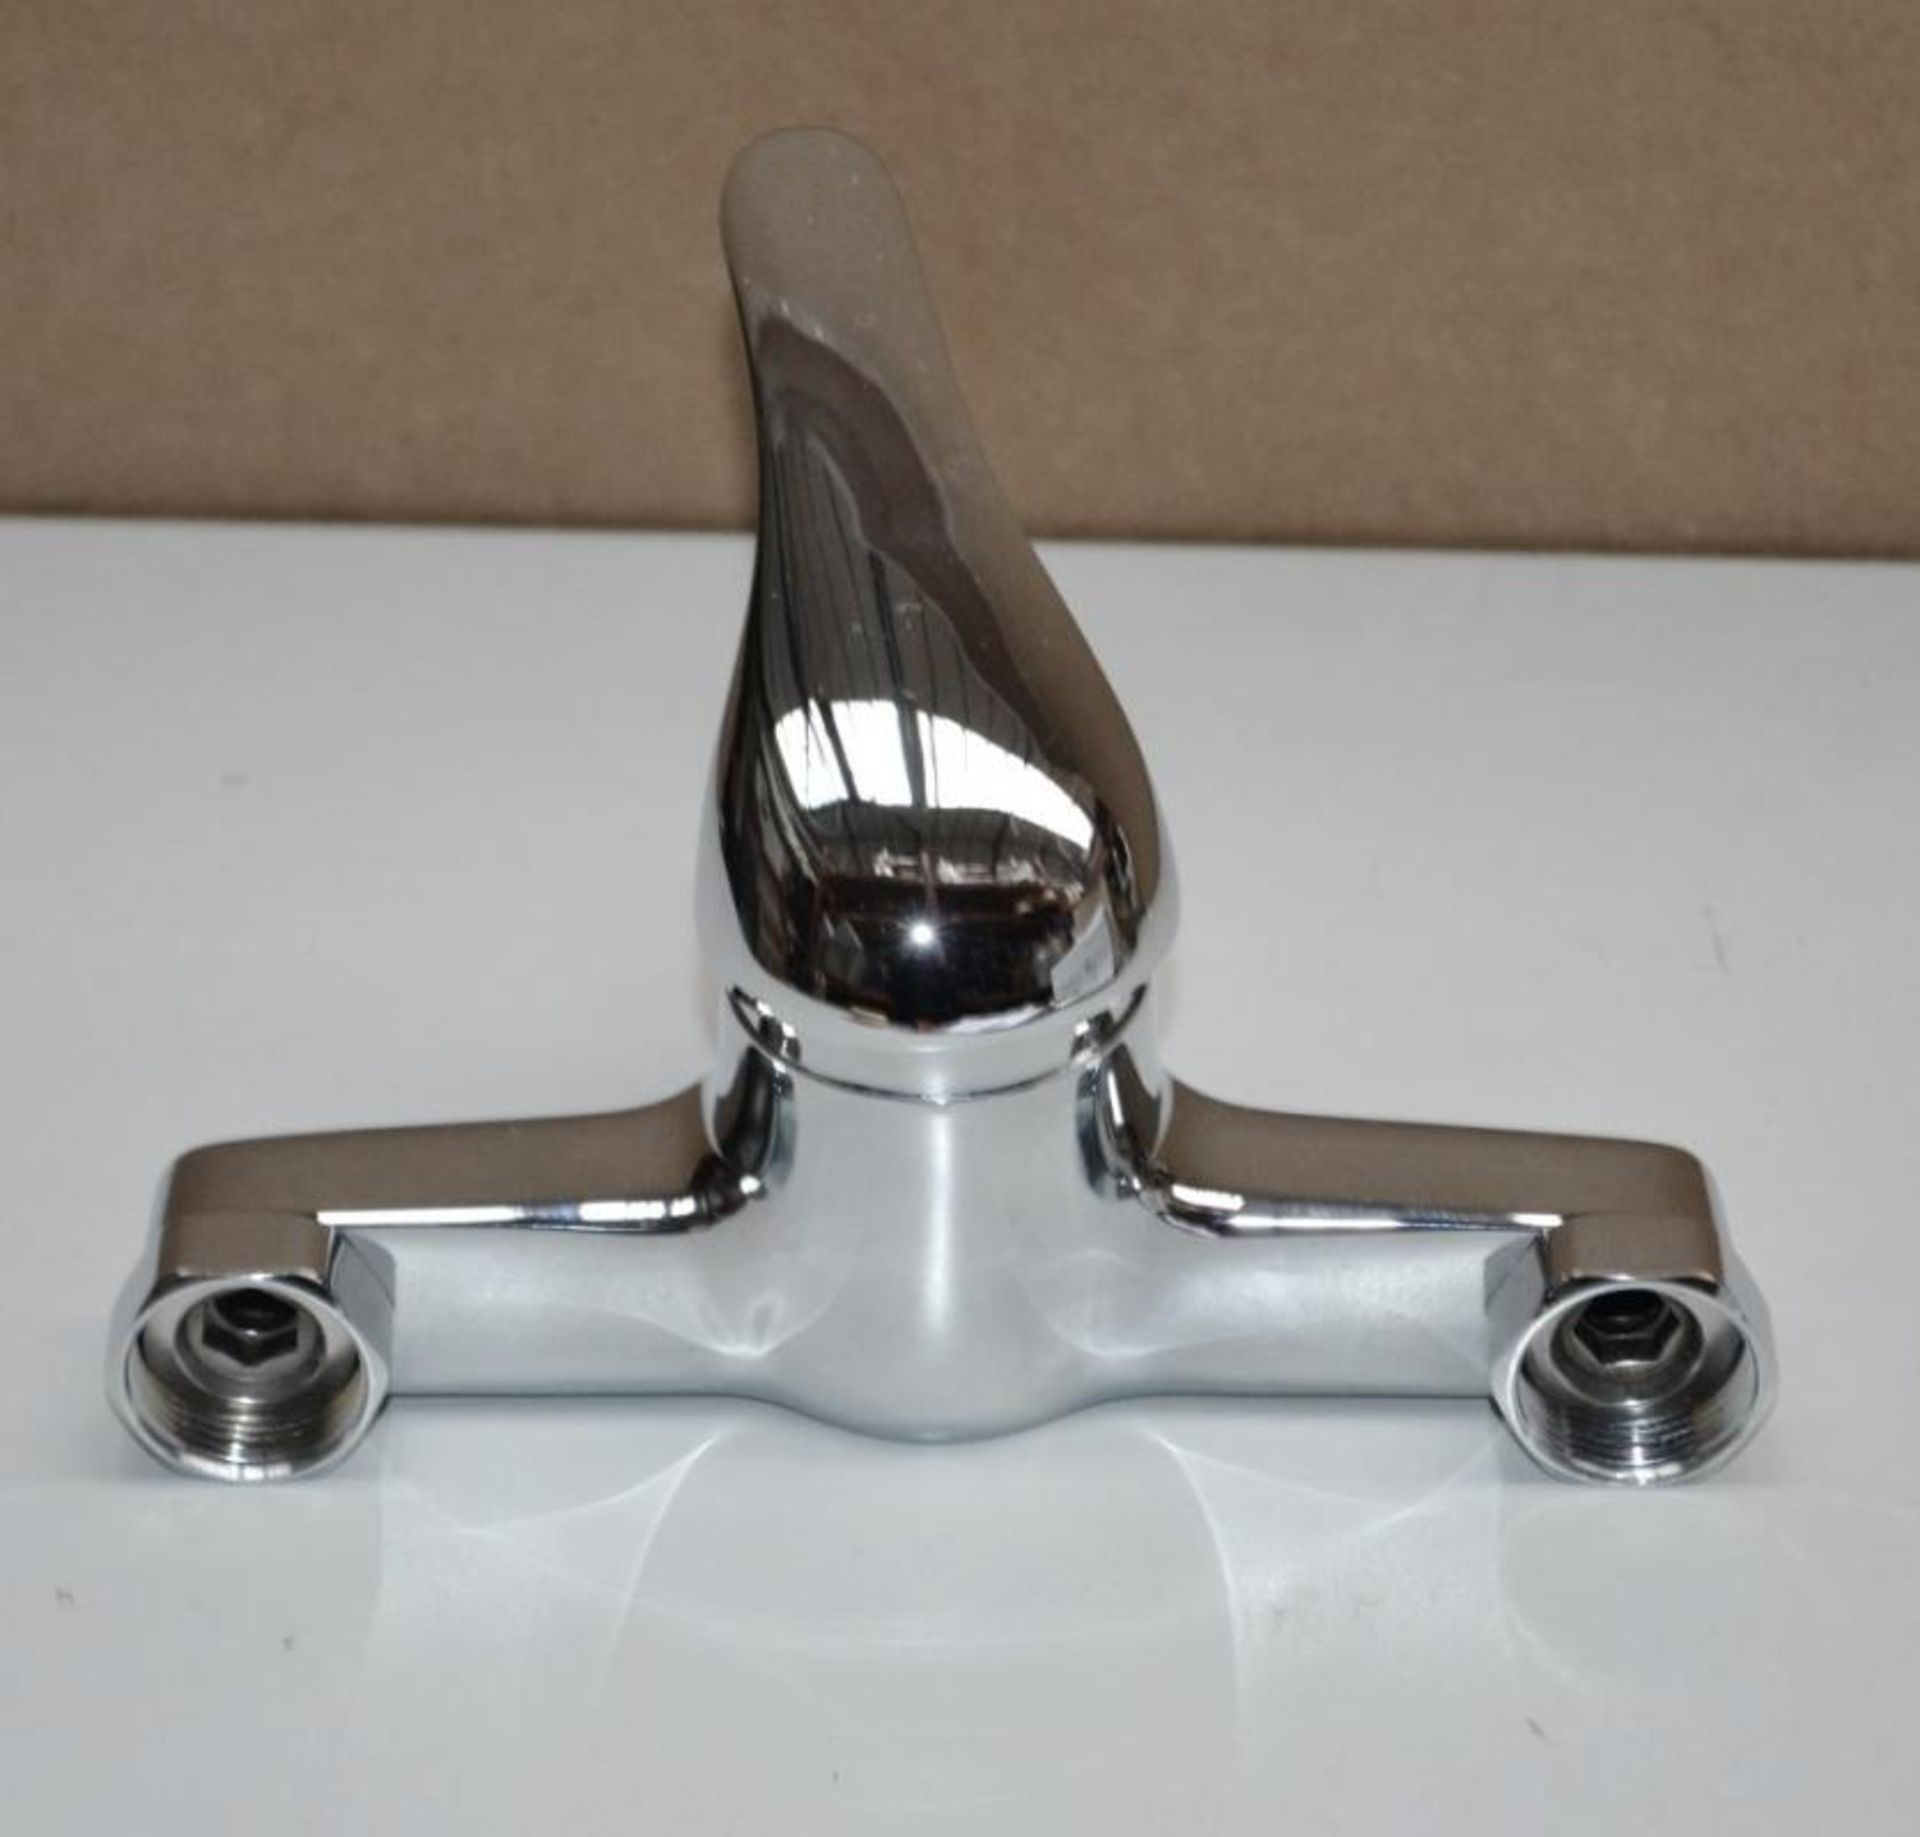 1 x PULSE Single Lever Bath Shower Mixer Tap In Chrome (Model: 112G2) - Ref: M188 - CL190 - Unused B - Image 4 of 7